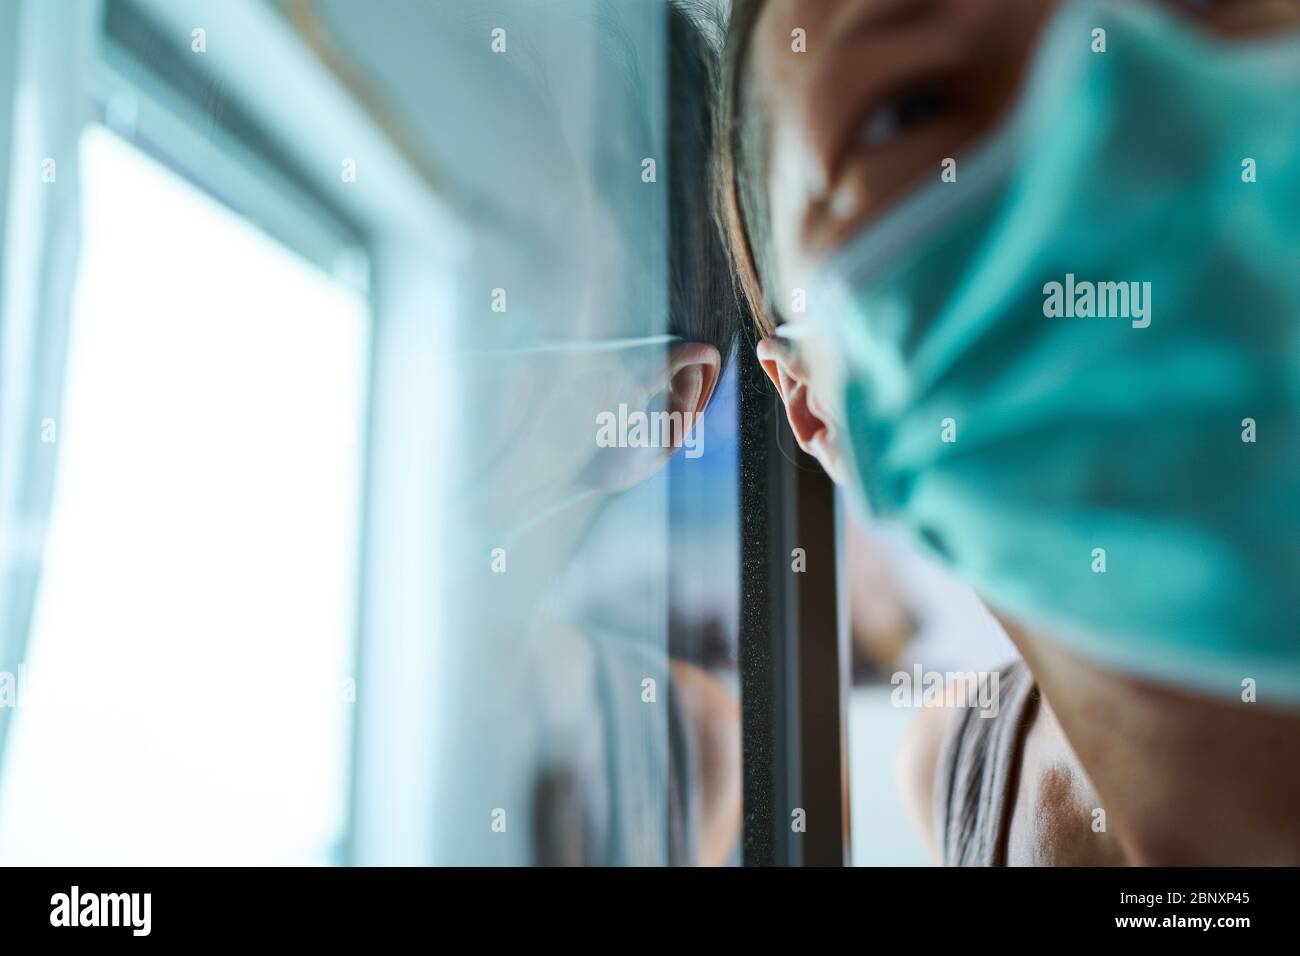 Pfaffenhofen, Germany, 16th of May, 2020. Woman with mouth protection against a corona infection. © Peter Schatz / Alamy Stock Photos Stock Photo